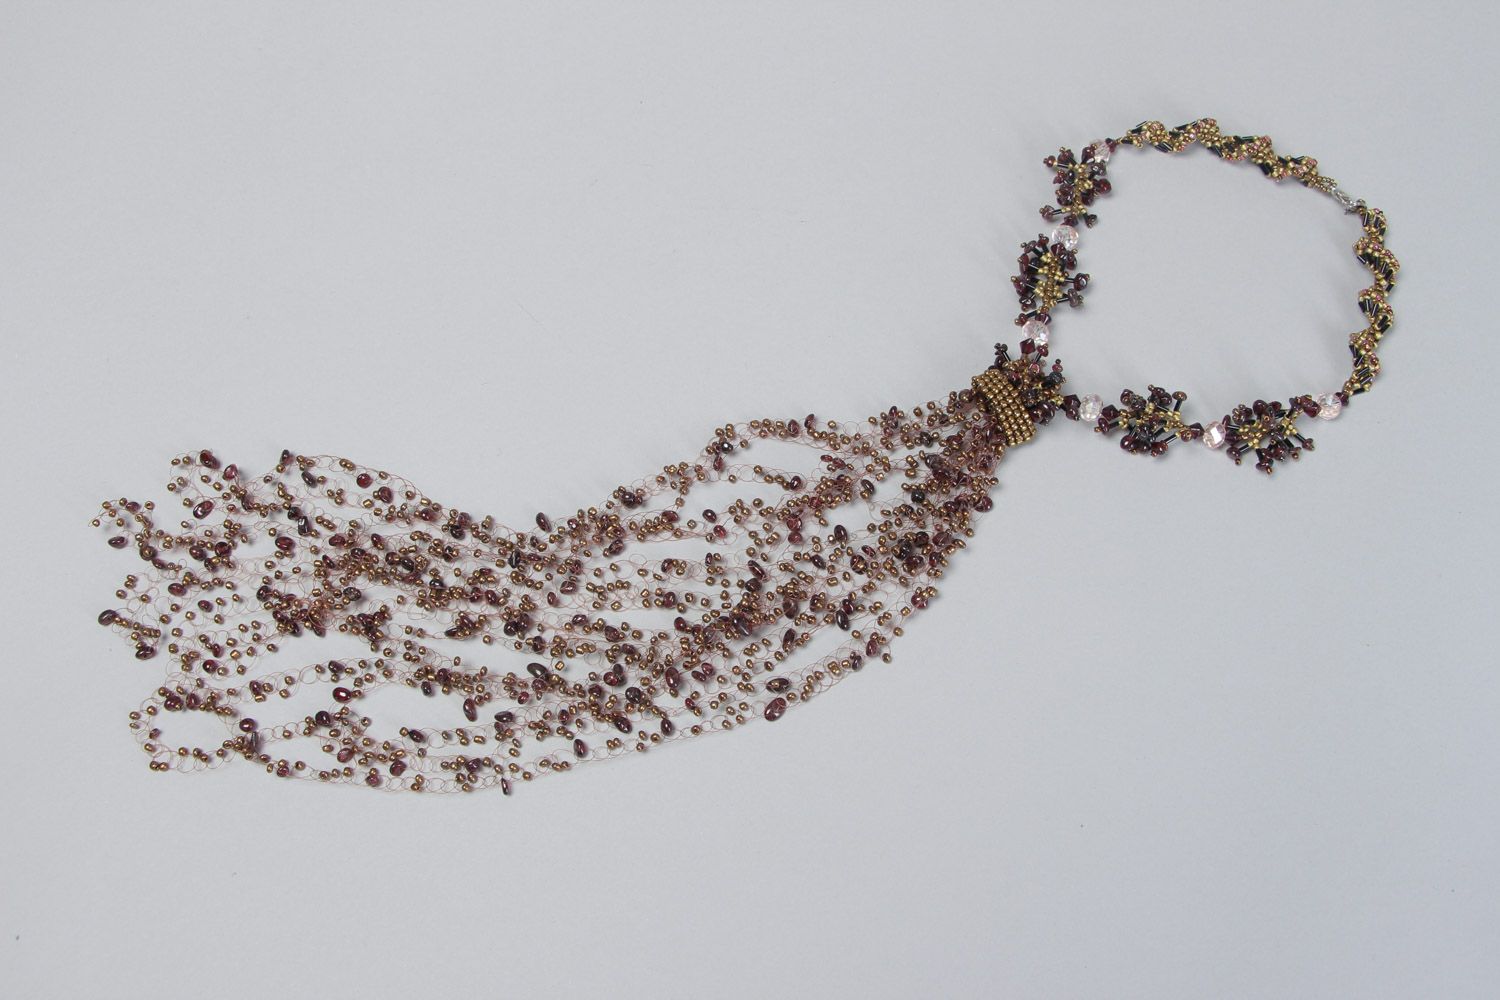 Handmade volume necklace woven of beads natural garnet stone and glass photo 2